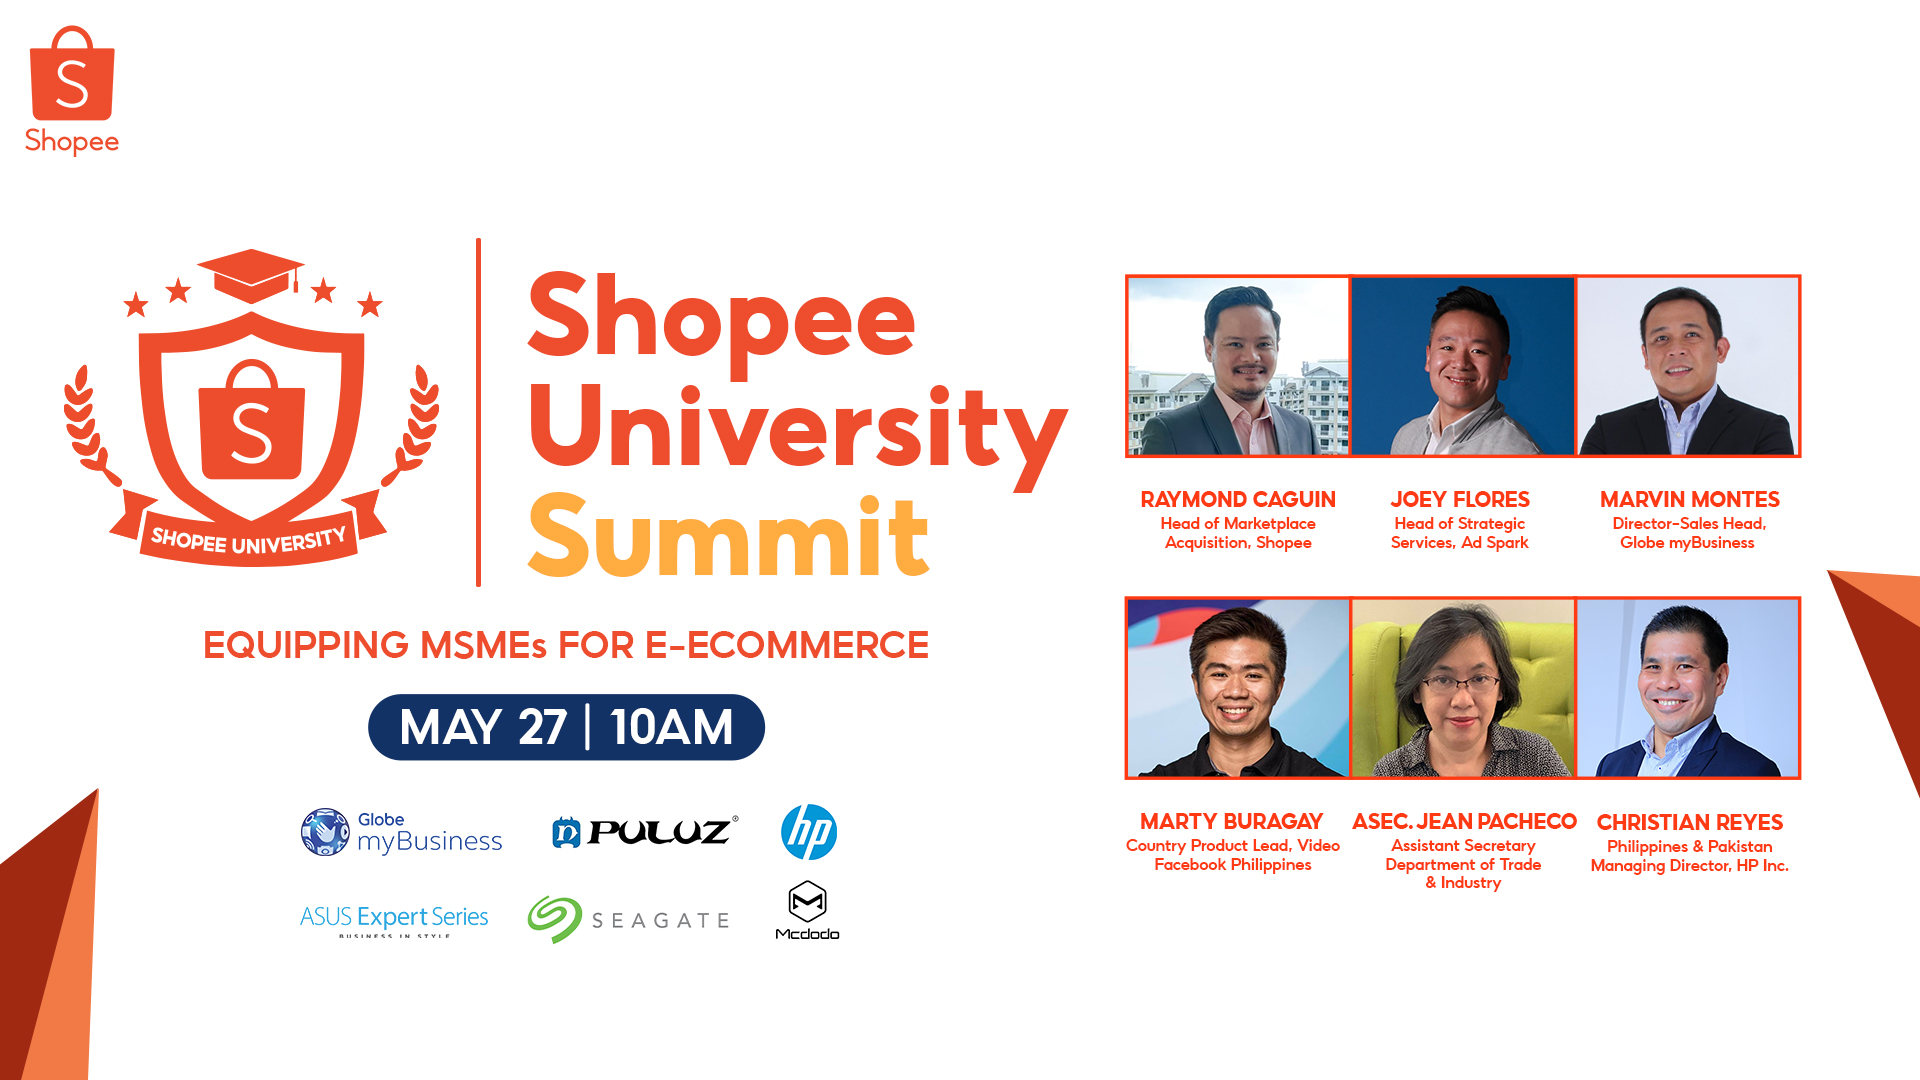 Shopee Invites Entrepreneurs to Join the First Shopee University Summit to Equip them for E-Commerce